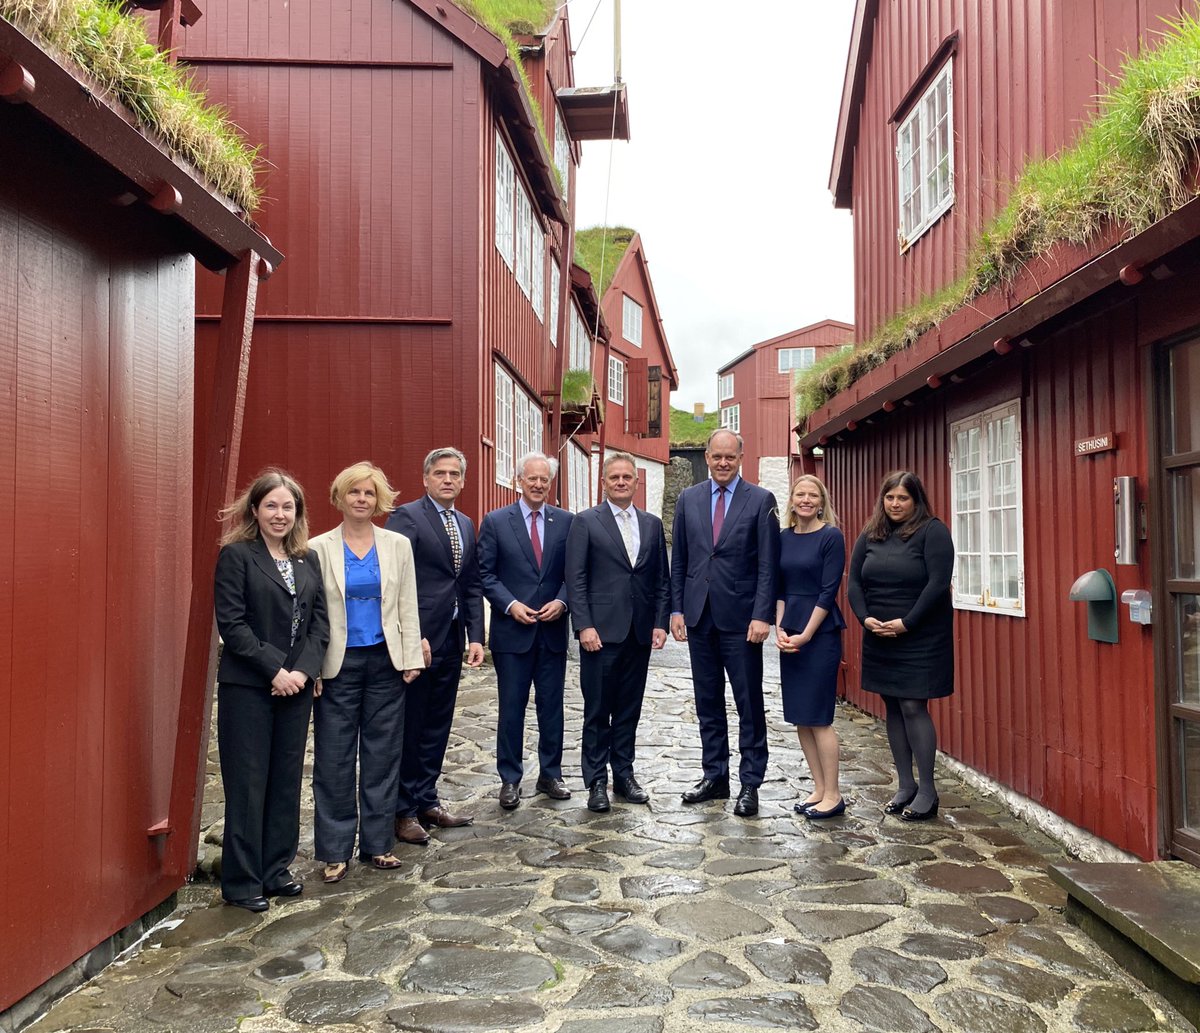 Valueable engagement against a challenging global backdrop today as the MFA met with @StateDept & @USAmbDenmark today to discuss ongoing endeavours to implement the vision set out in the 🇫🇴-🇺🇸 Partnership Declaration 🤝